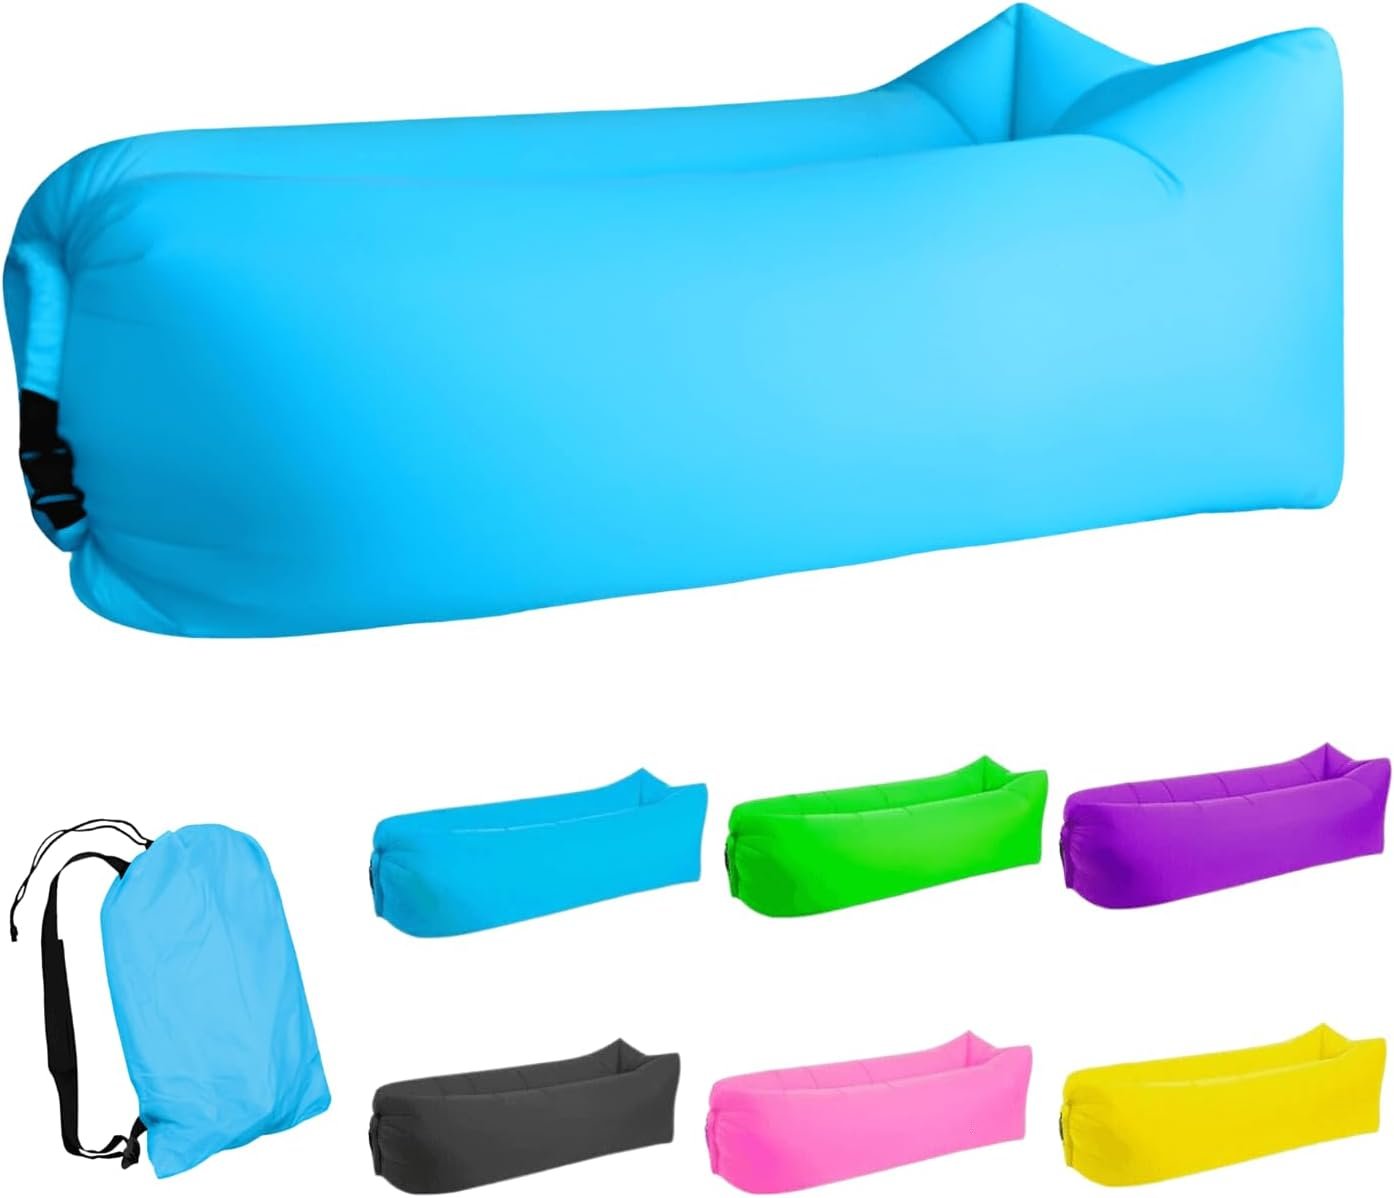 Inflatable Lounger Air Sofa Hammock Review